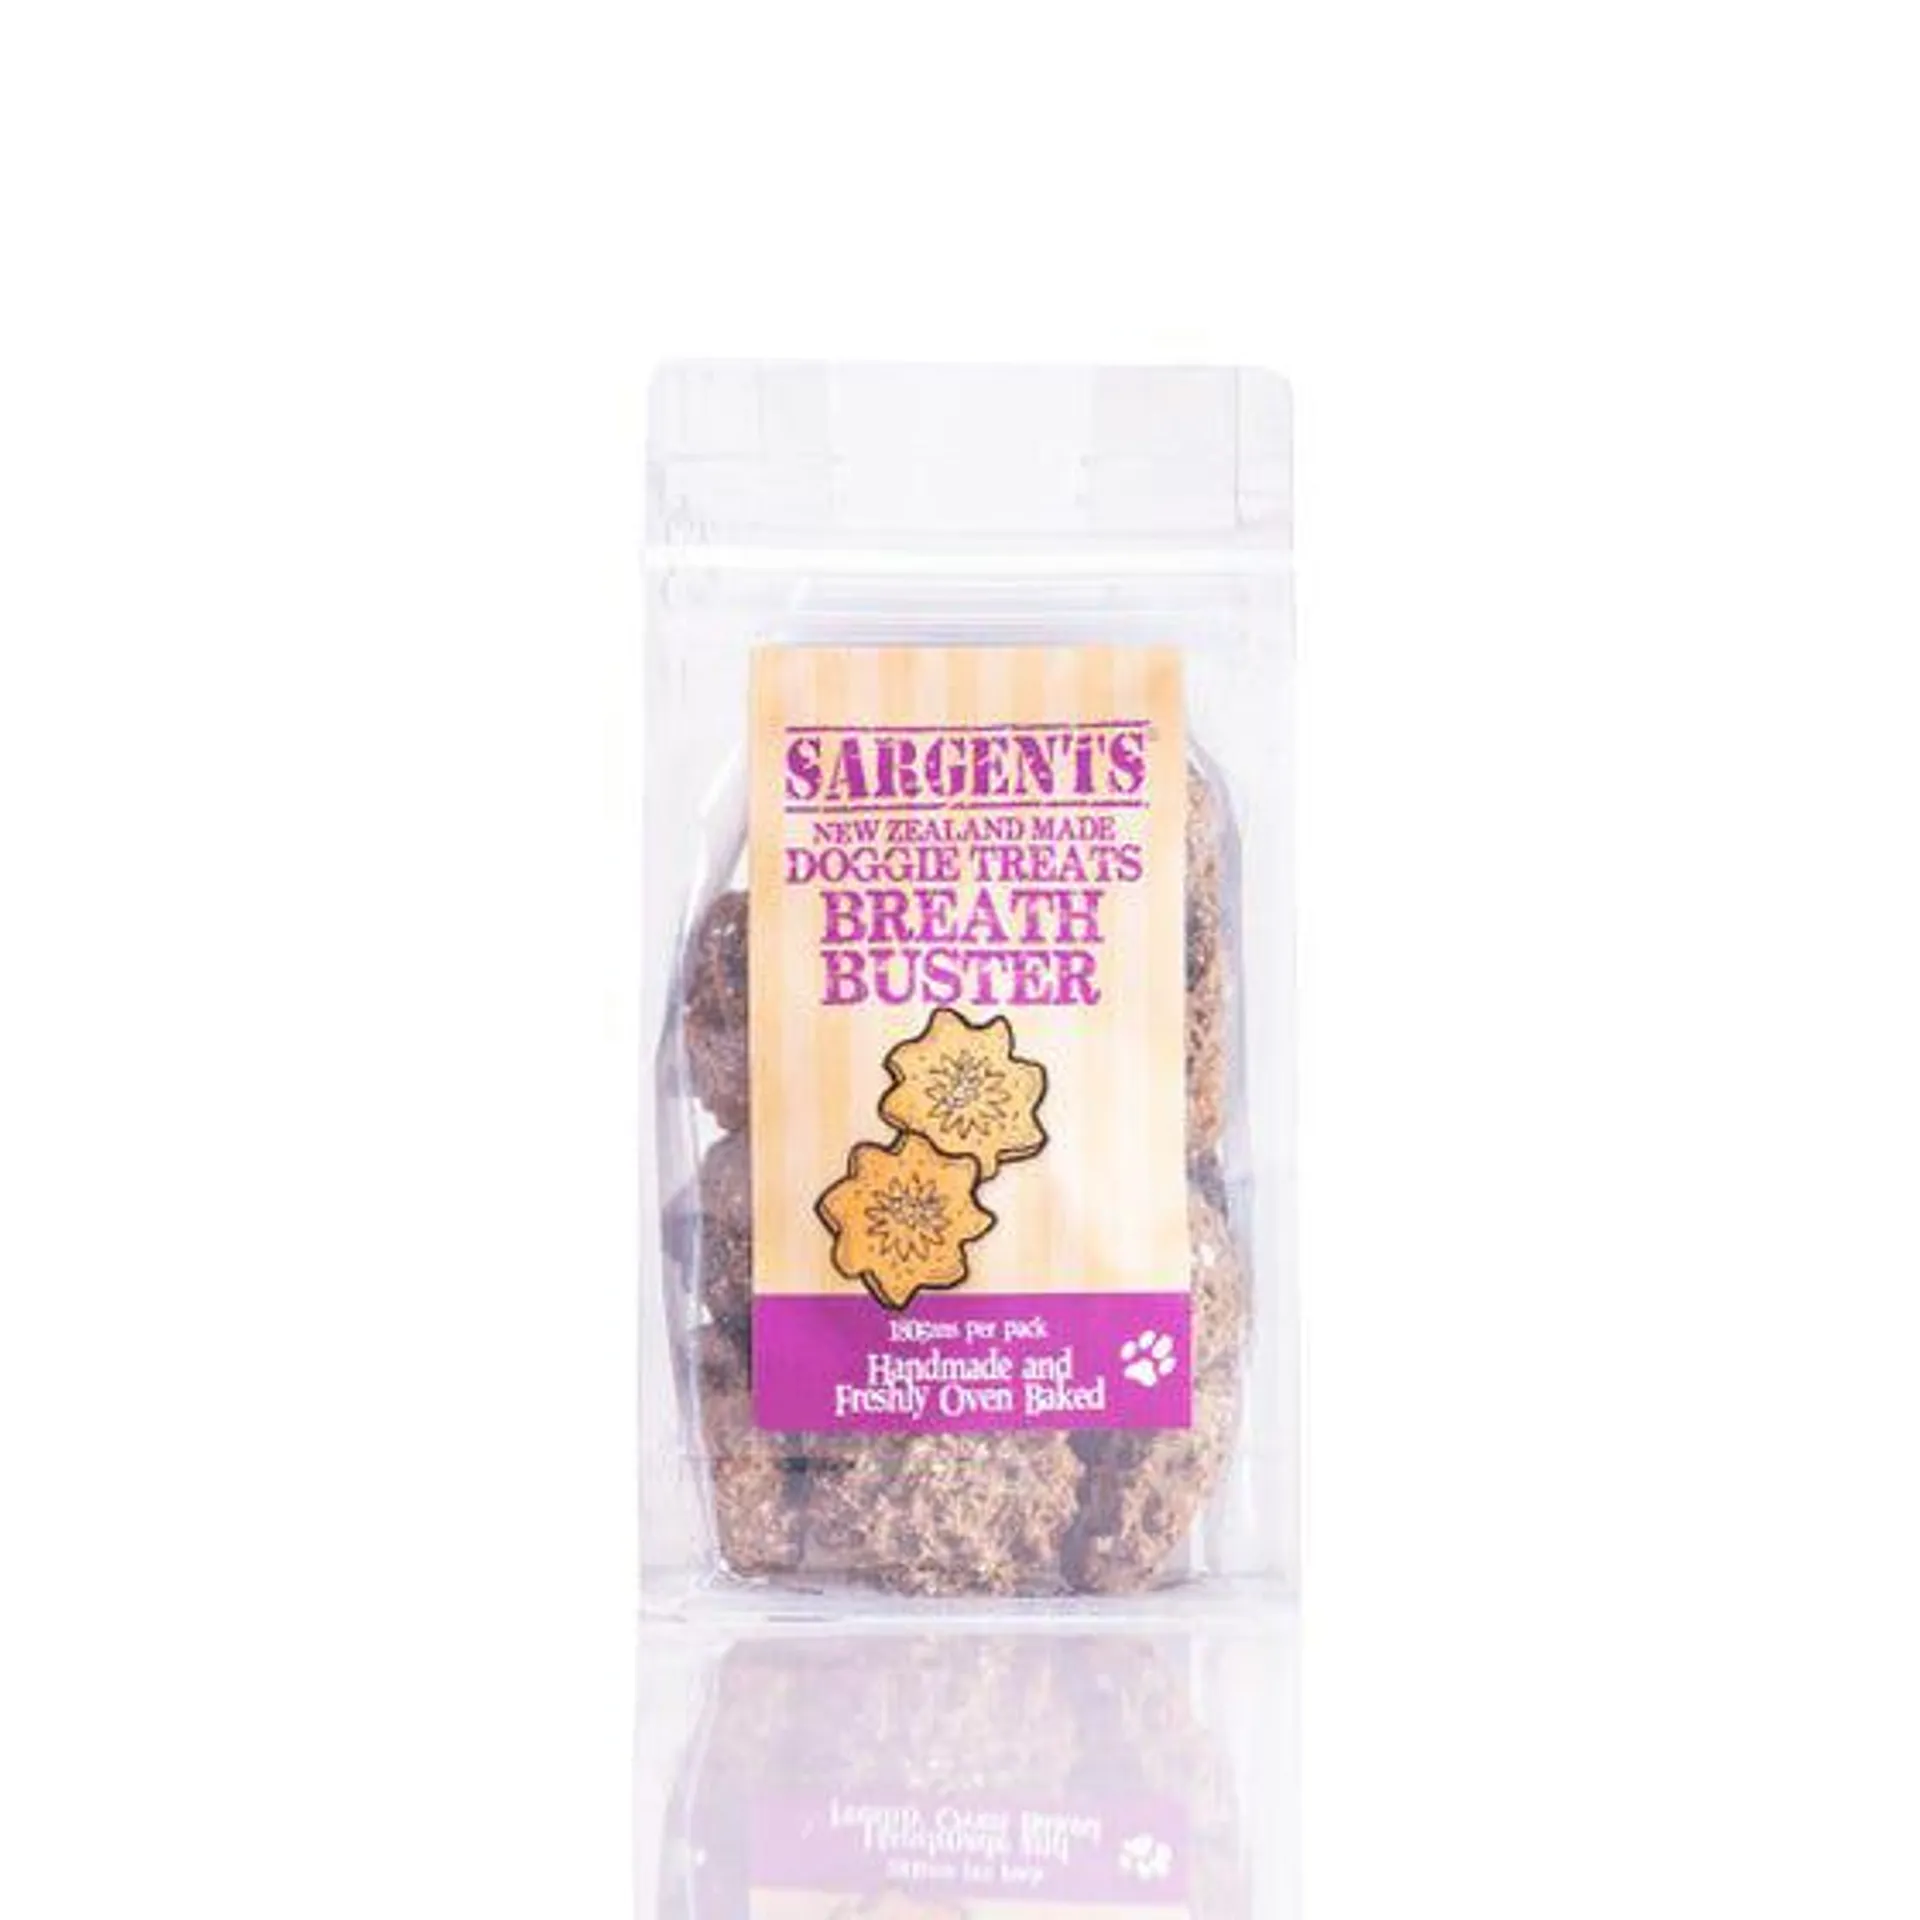 Sargent's Breath Buster Dog Treats 180g